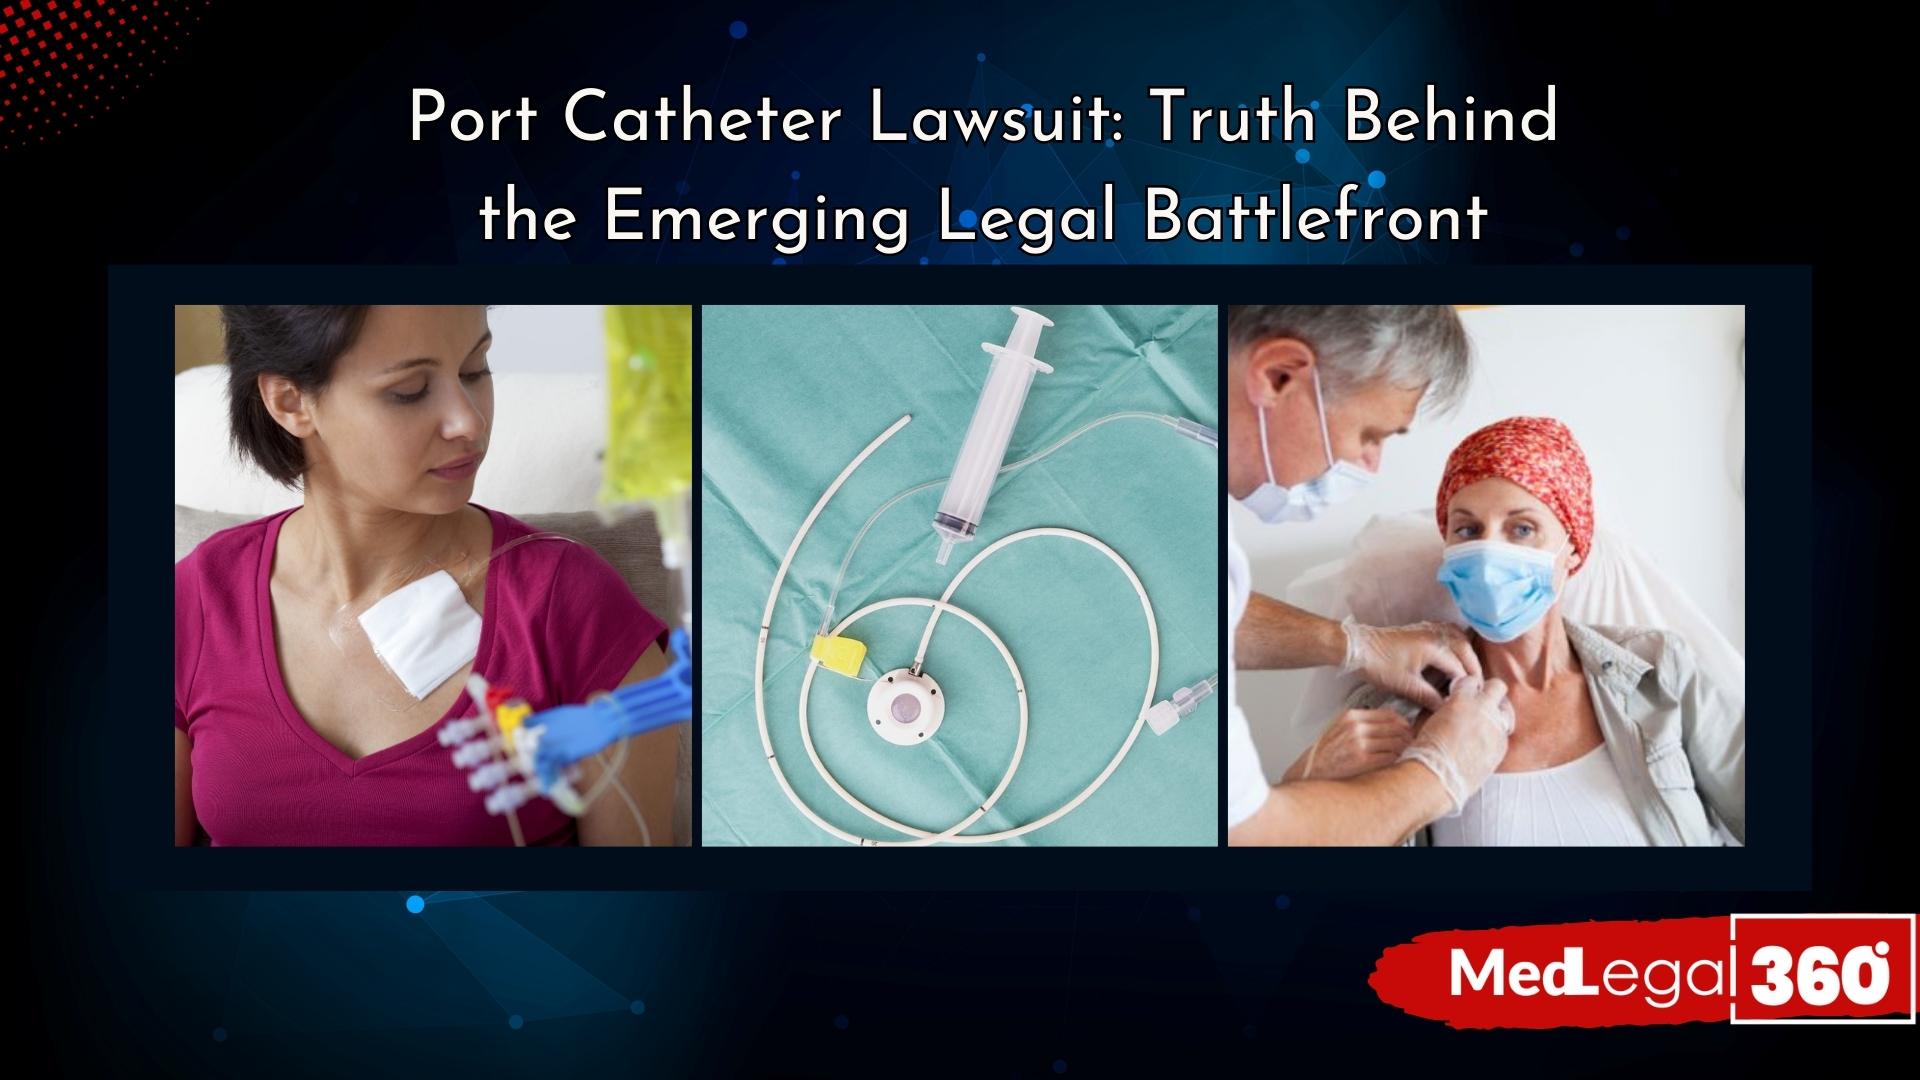 Port Catheter Lawsuit: Truth Behind the Emerging Legal Battlefront